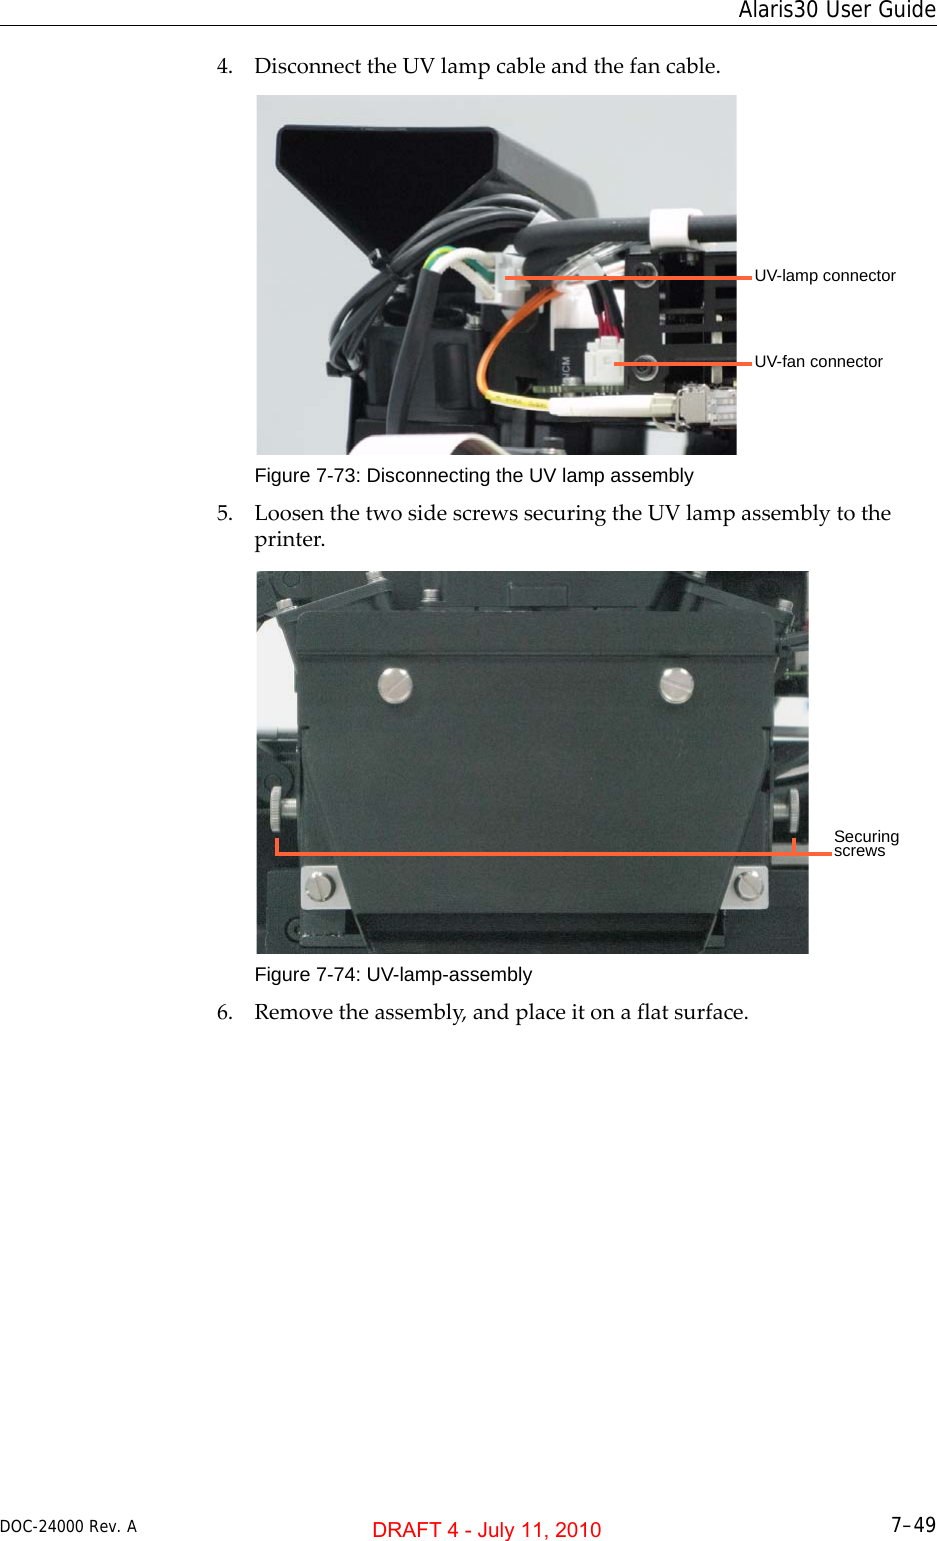 DOC-24000 Rev. A 7–49Alaris30 User Guide4. DisconnecttheUVlampcableandthefancable.Figure 7-73: Disconnecting the UV lamp assembly5. LoosenthetwosidescrewssecuringtheUVlampassemblytotheprinter.Figure 7-74: UV-lamp-assembly6. Removetheassembly,andplaceitonaflatsurface.UV-lamp connectorUV-fan connectorSecuring screwsDRAFT 4 - July 11, 2010